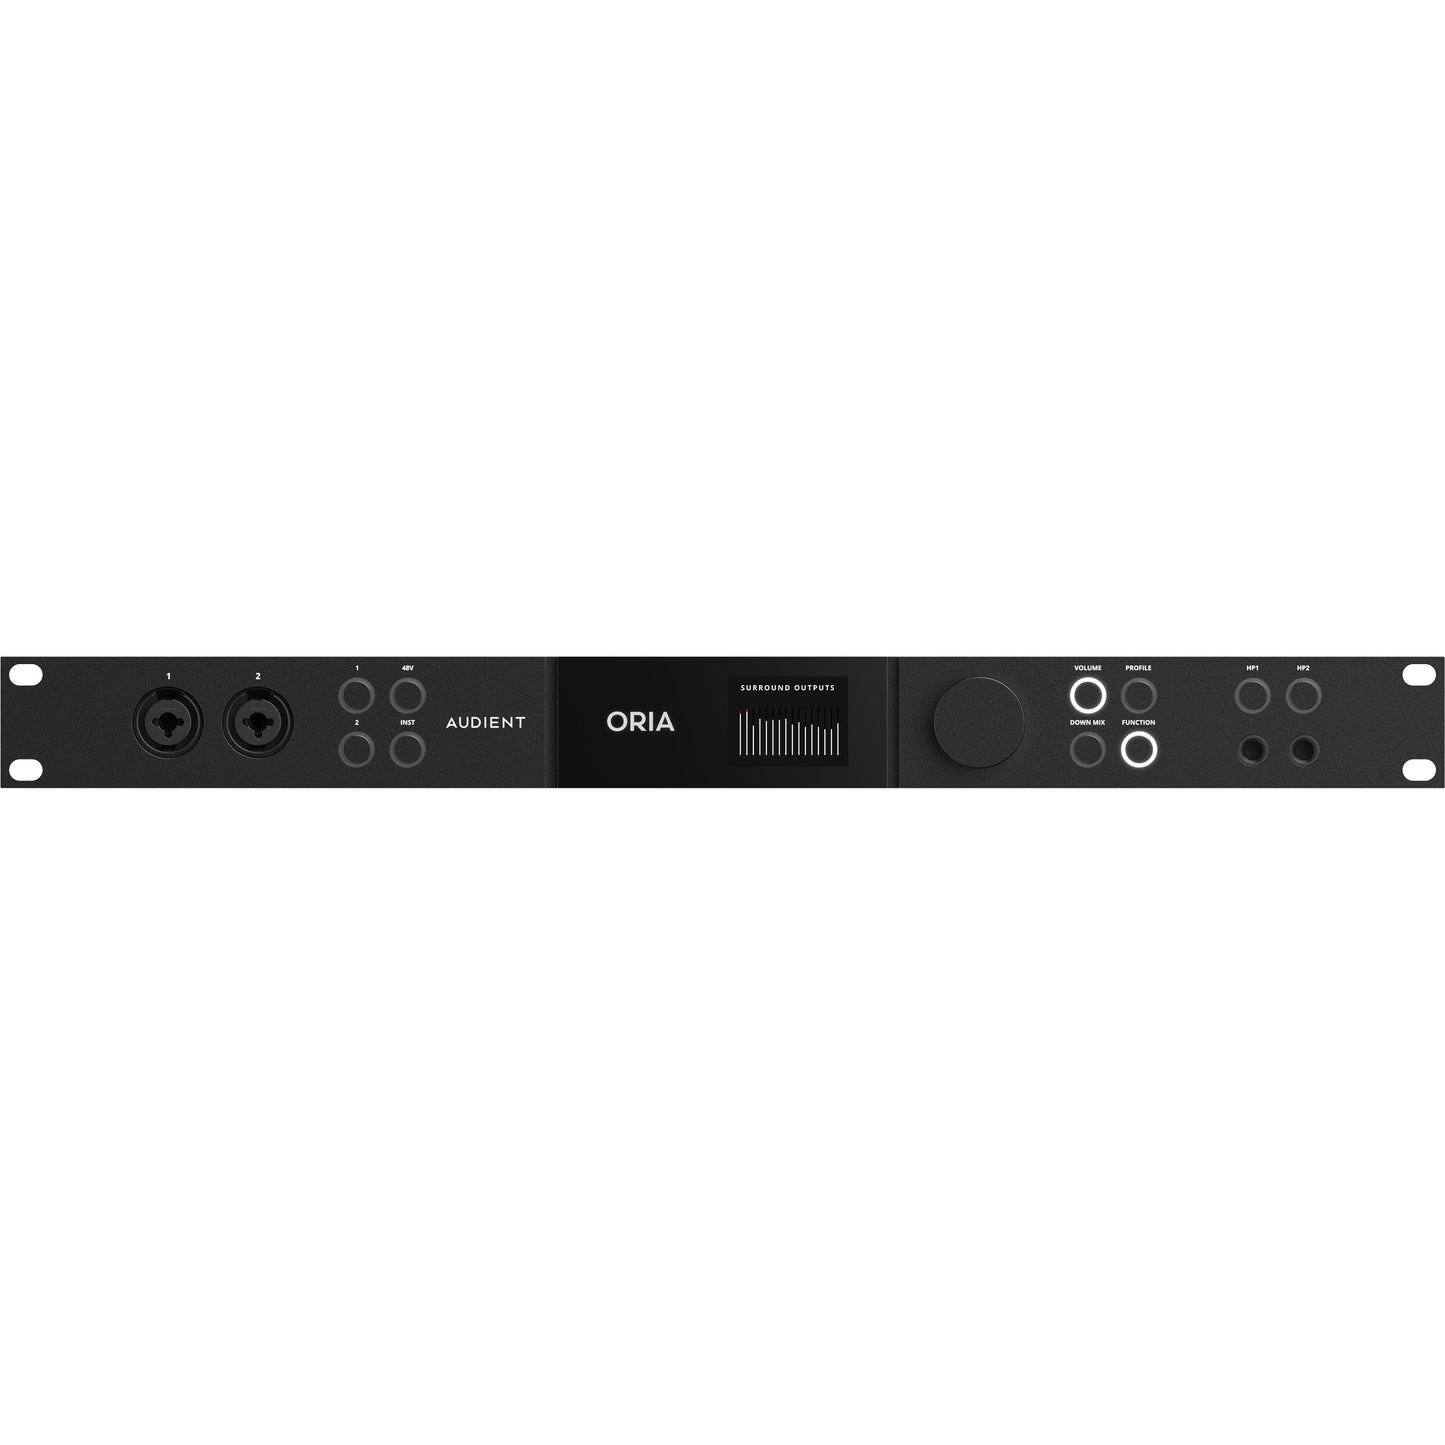 Audient Oria Immersive Audio Interface and Monitor Controller